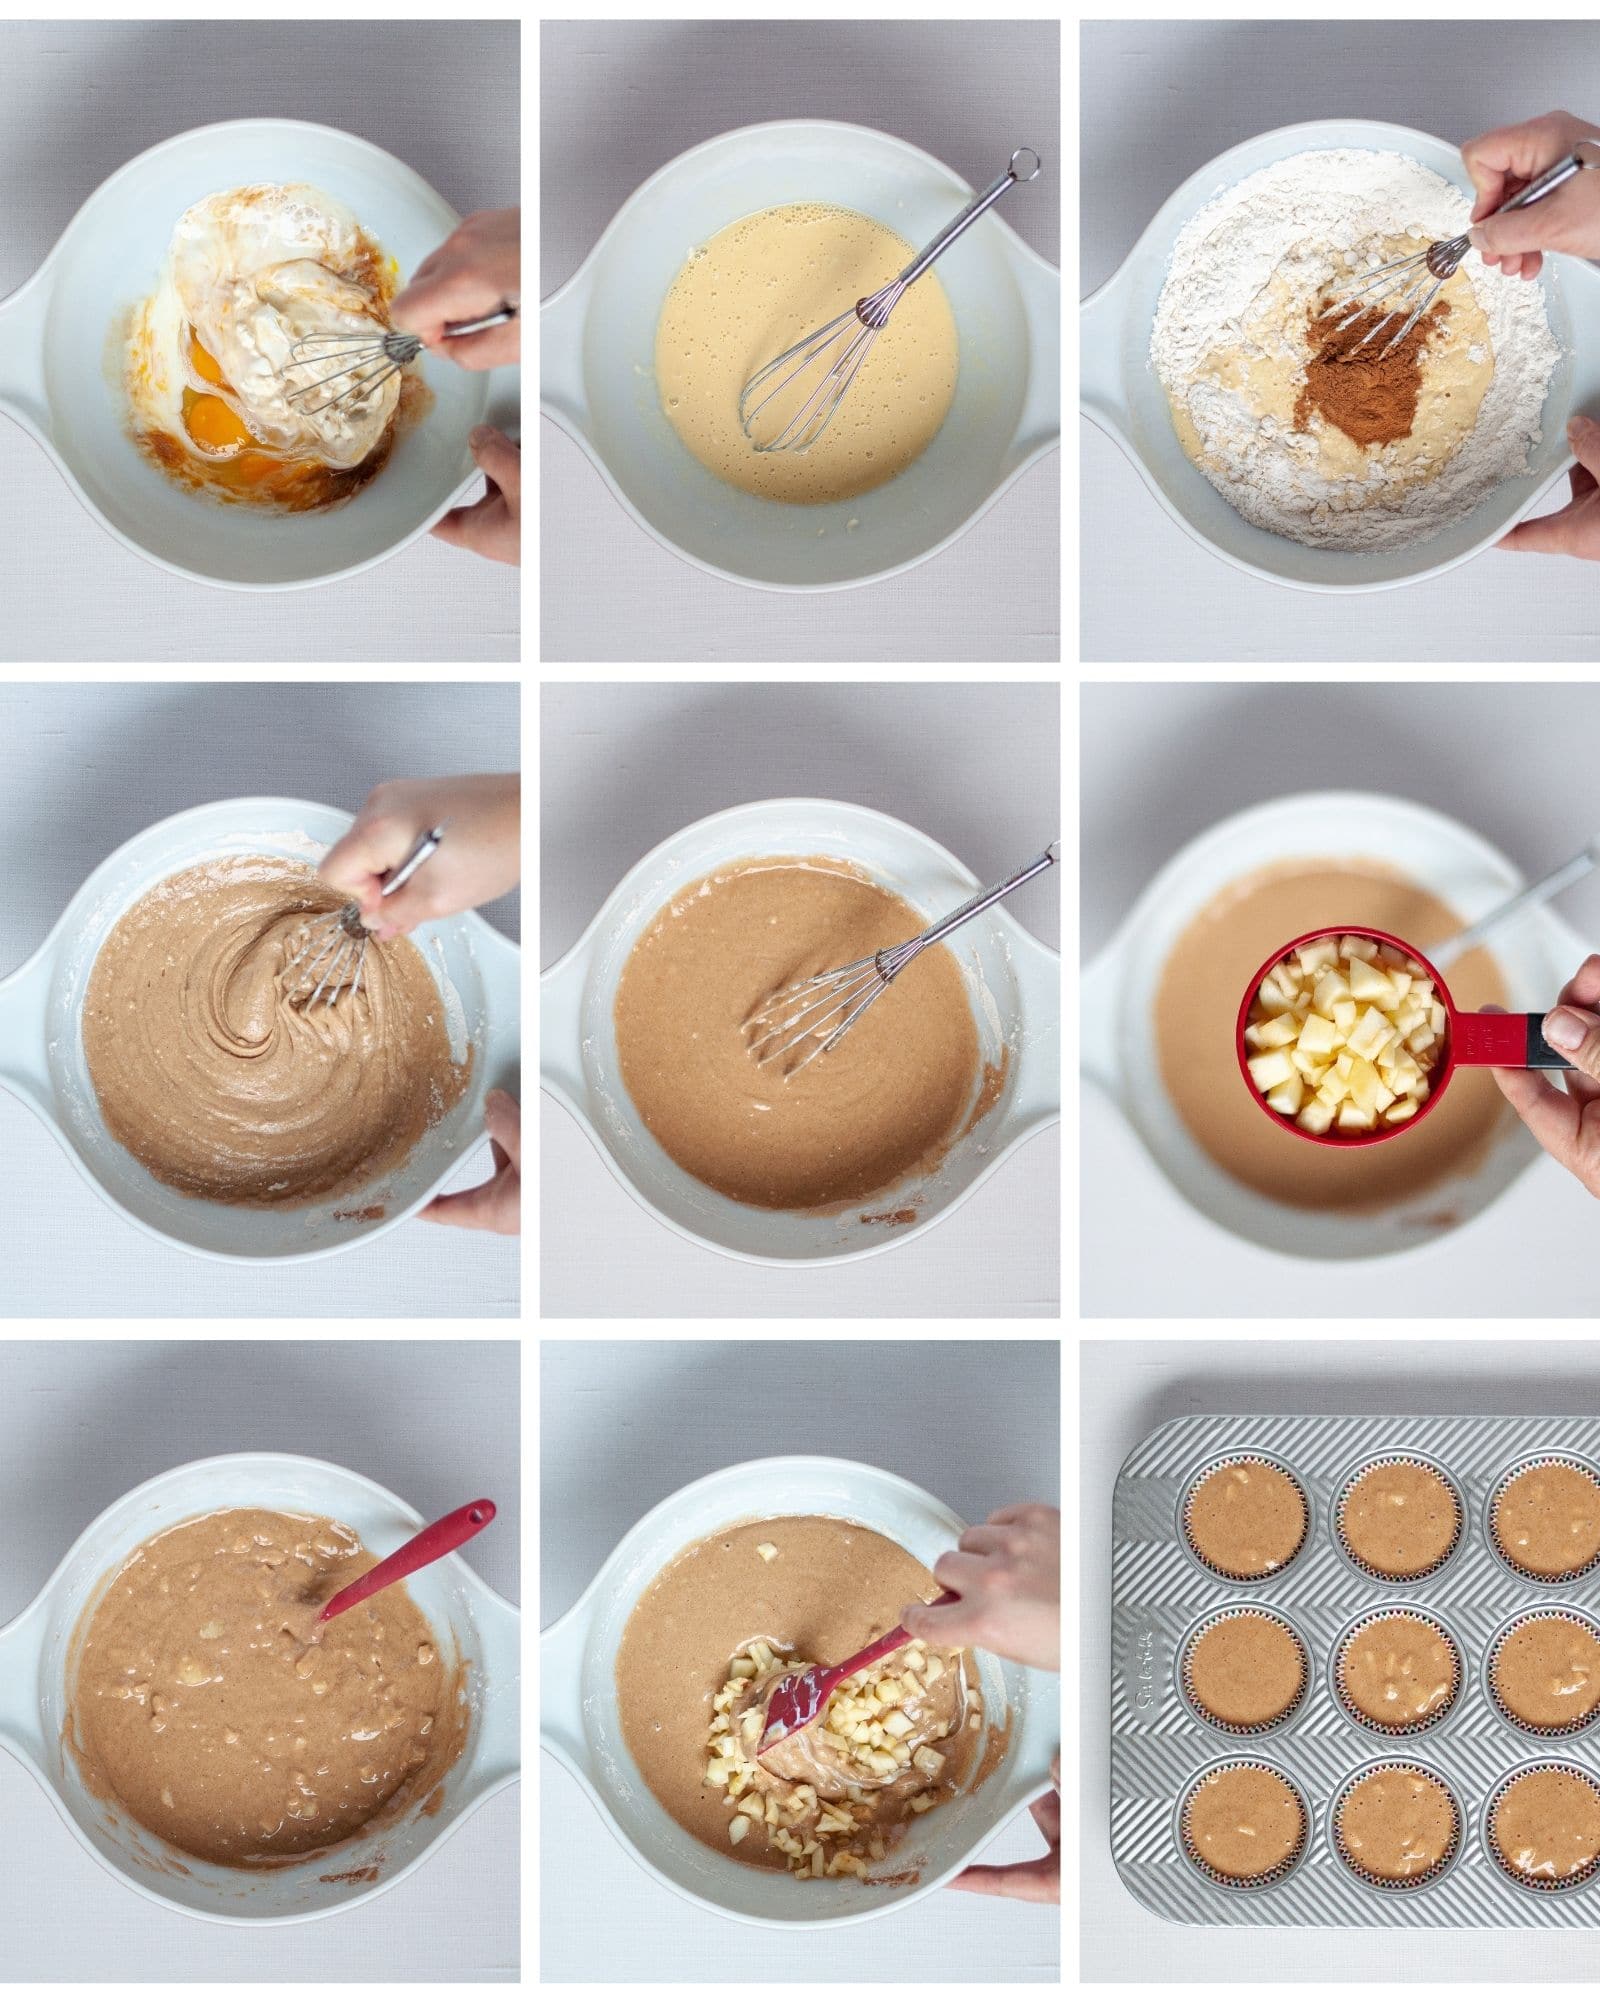 Collage of process shots showing how to make this apple cinnamon cupcake recipe through putting the batter into the lined muffin tins.